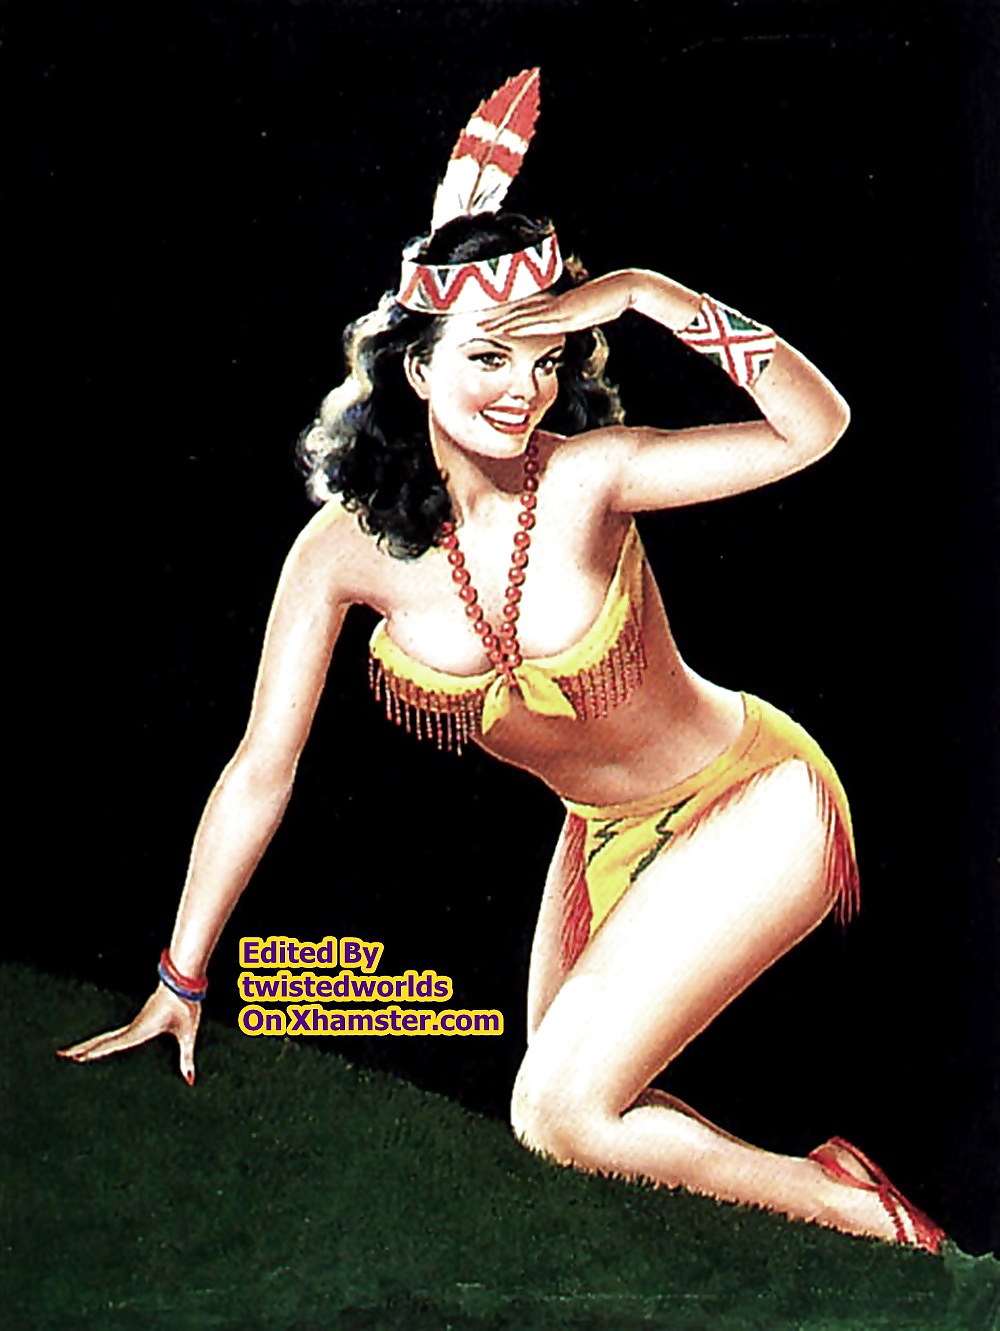 Vintage Pinup Girls New & Old Erotica By twistedworlds #16556202